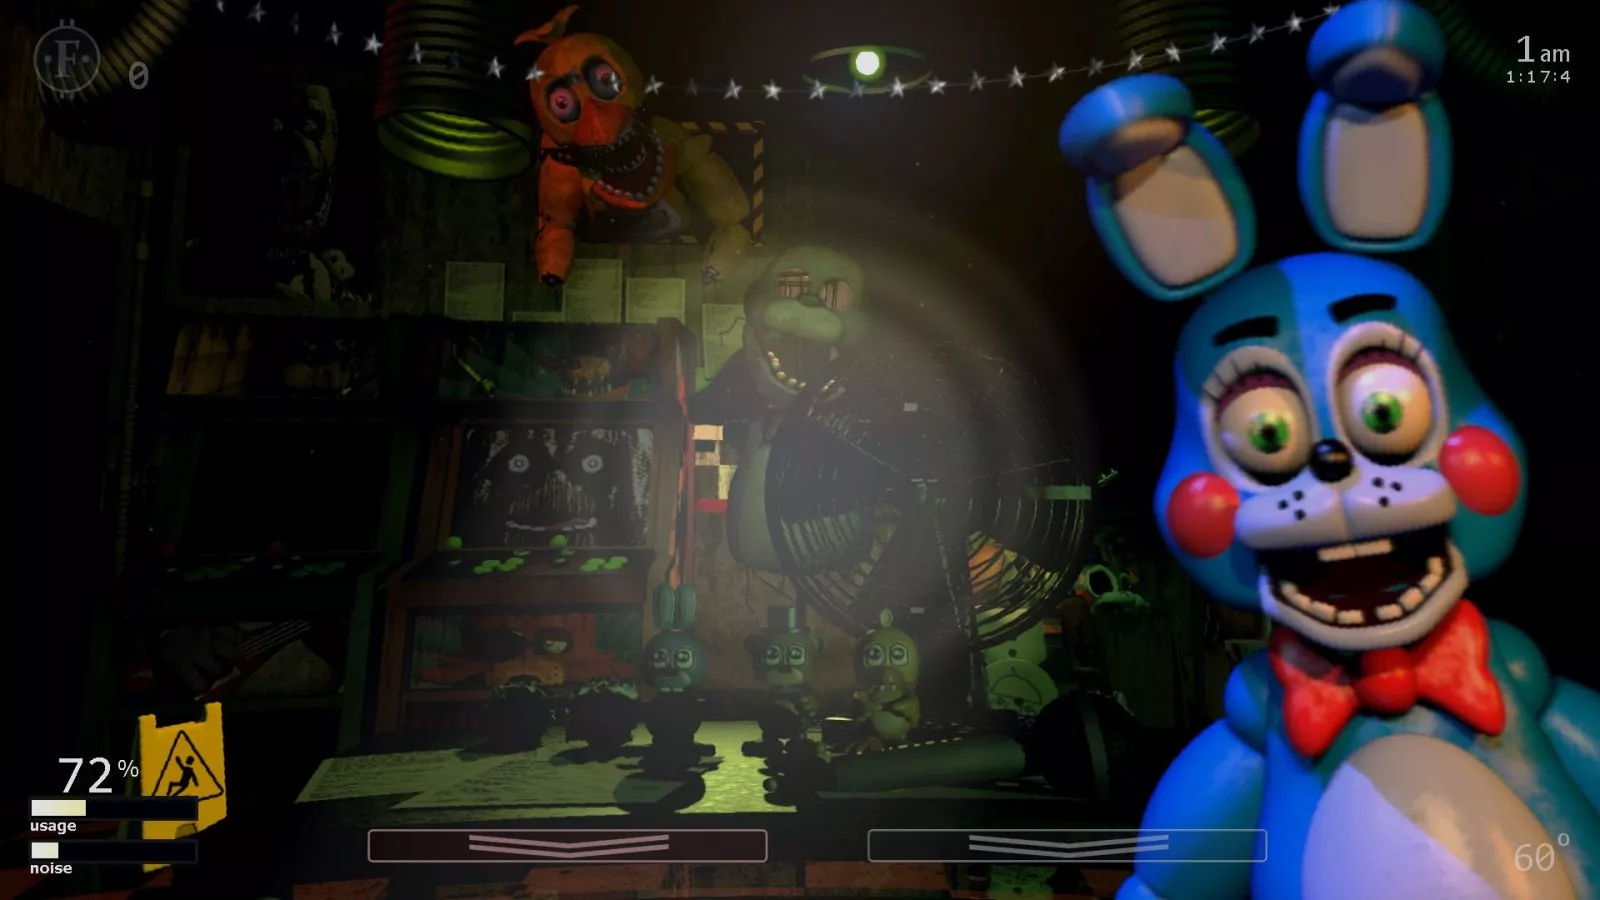 Five Nights At Freddy's - Walkthrough [1] DON'T WATCH AT NIGHT!! (+Download)  